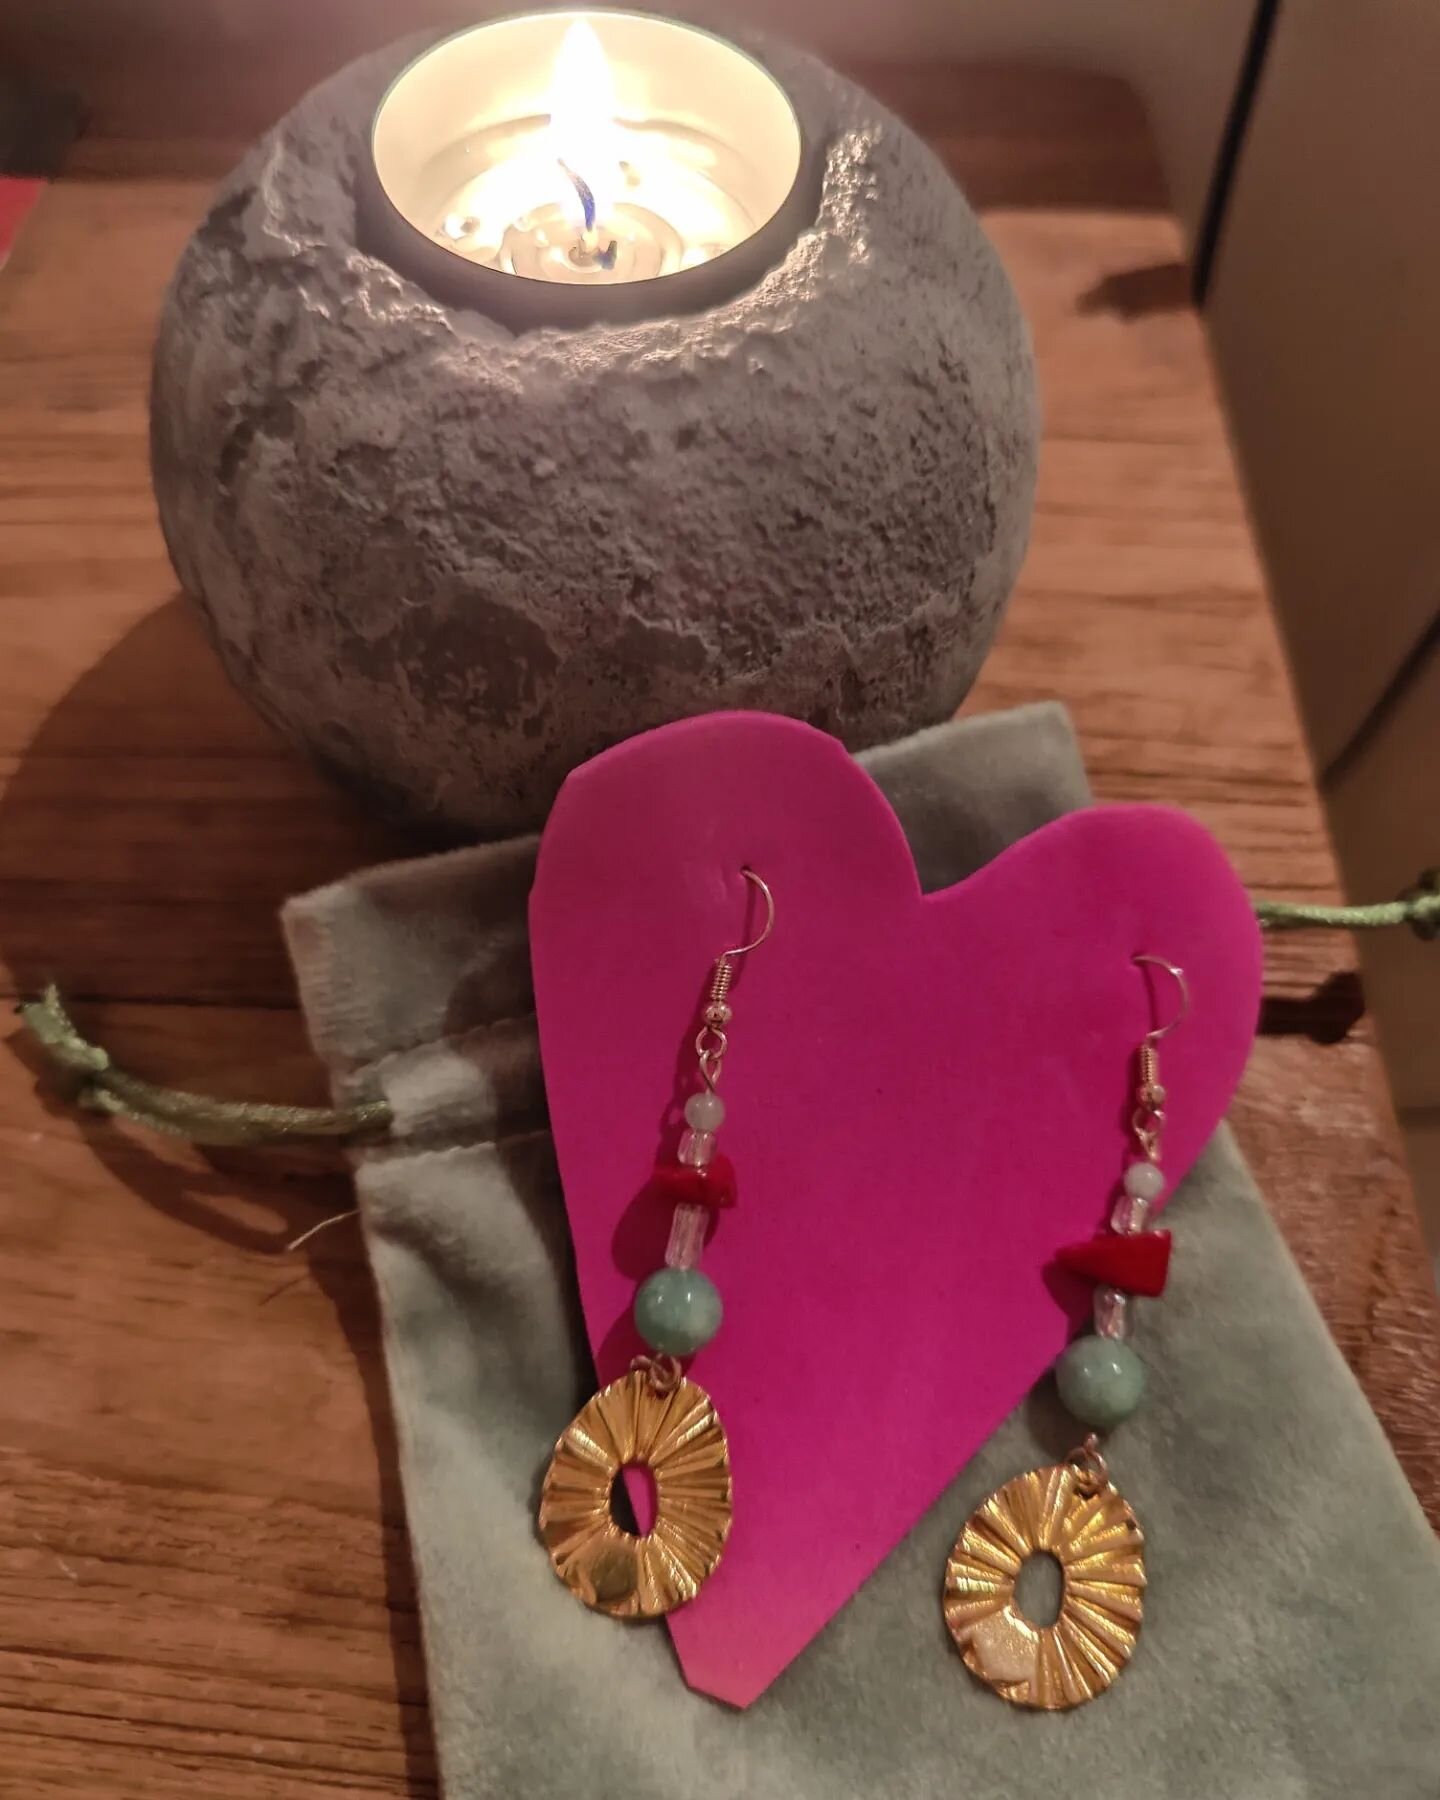 So many times we hold ourselves back because we're afraid to let our light shine into the world. 

These diva earrings remind you to stay positive, keep shining and let all the beauty inside shine right on the outside.

These handmade earrings contai